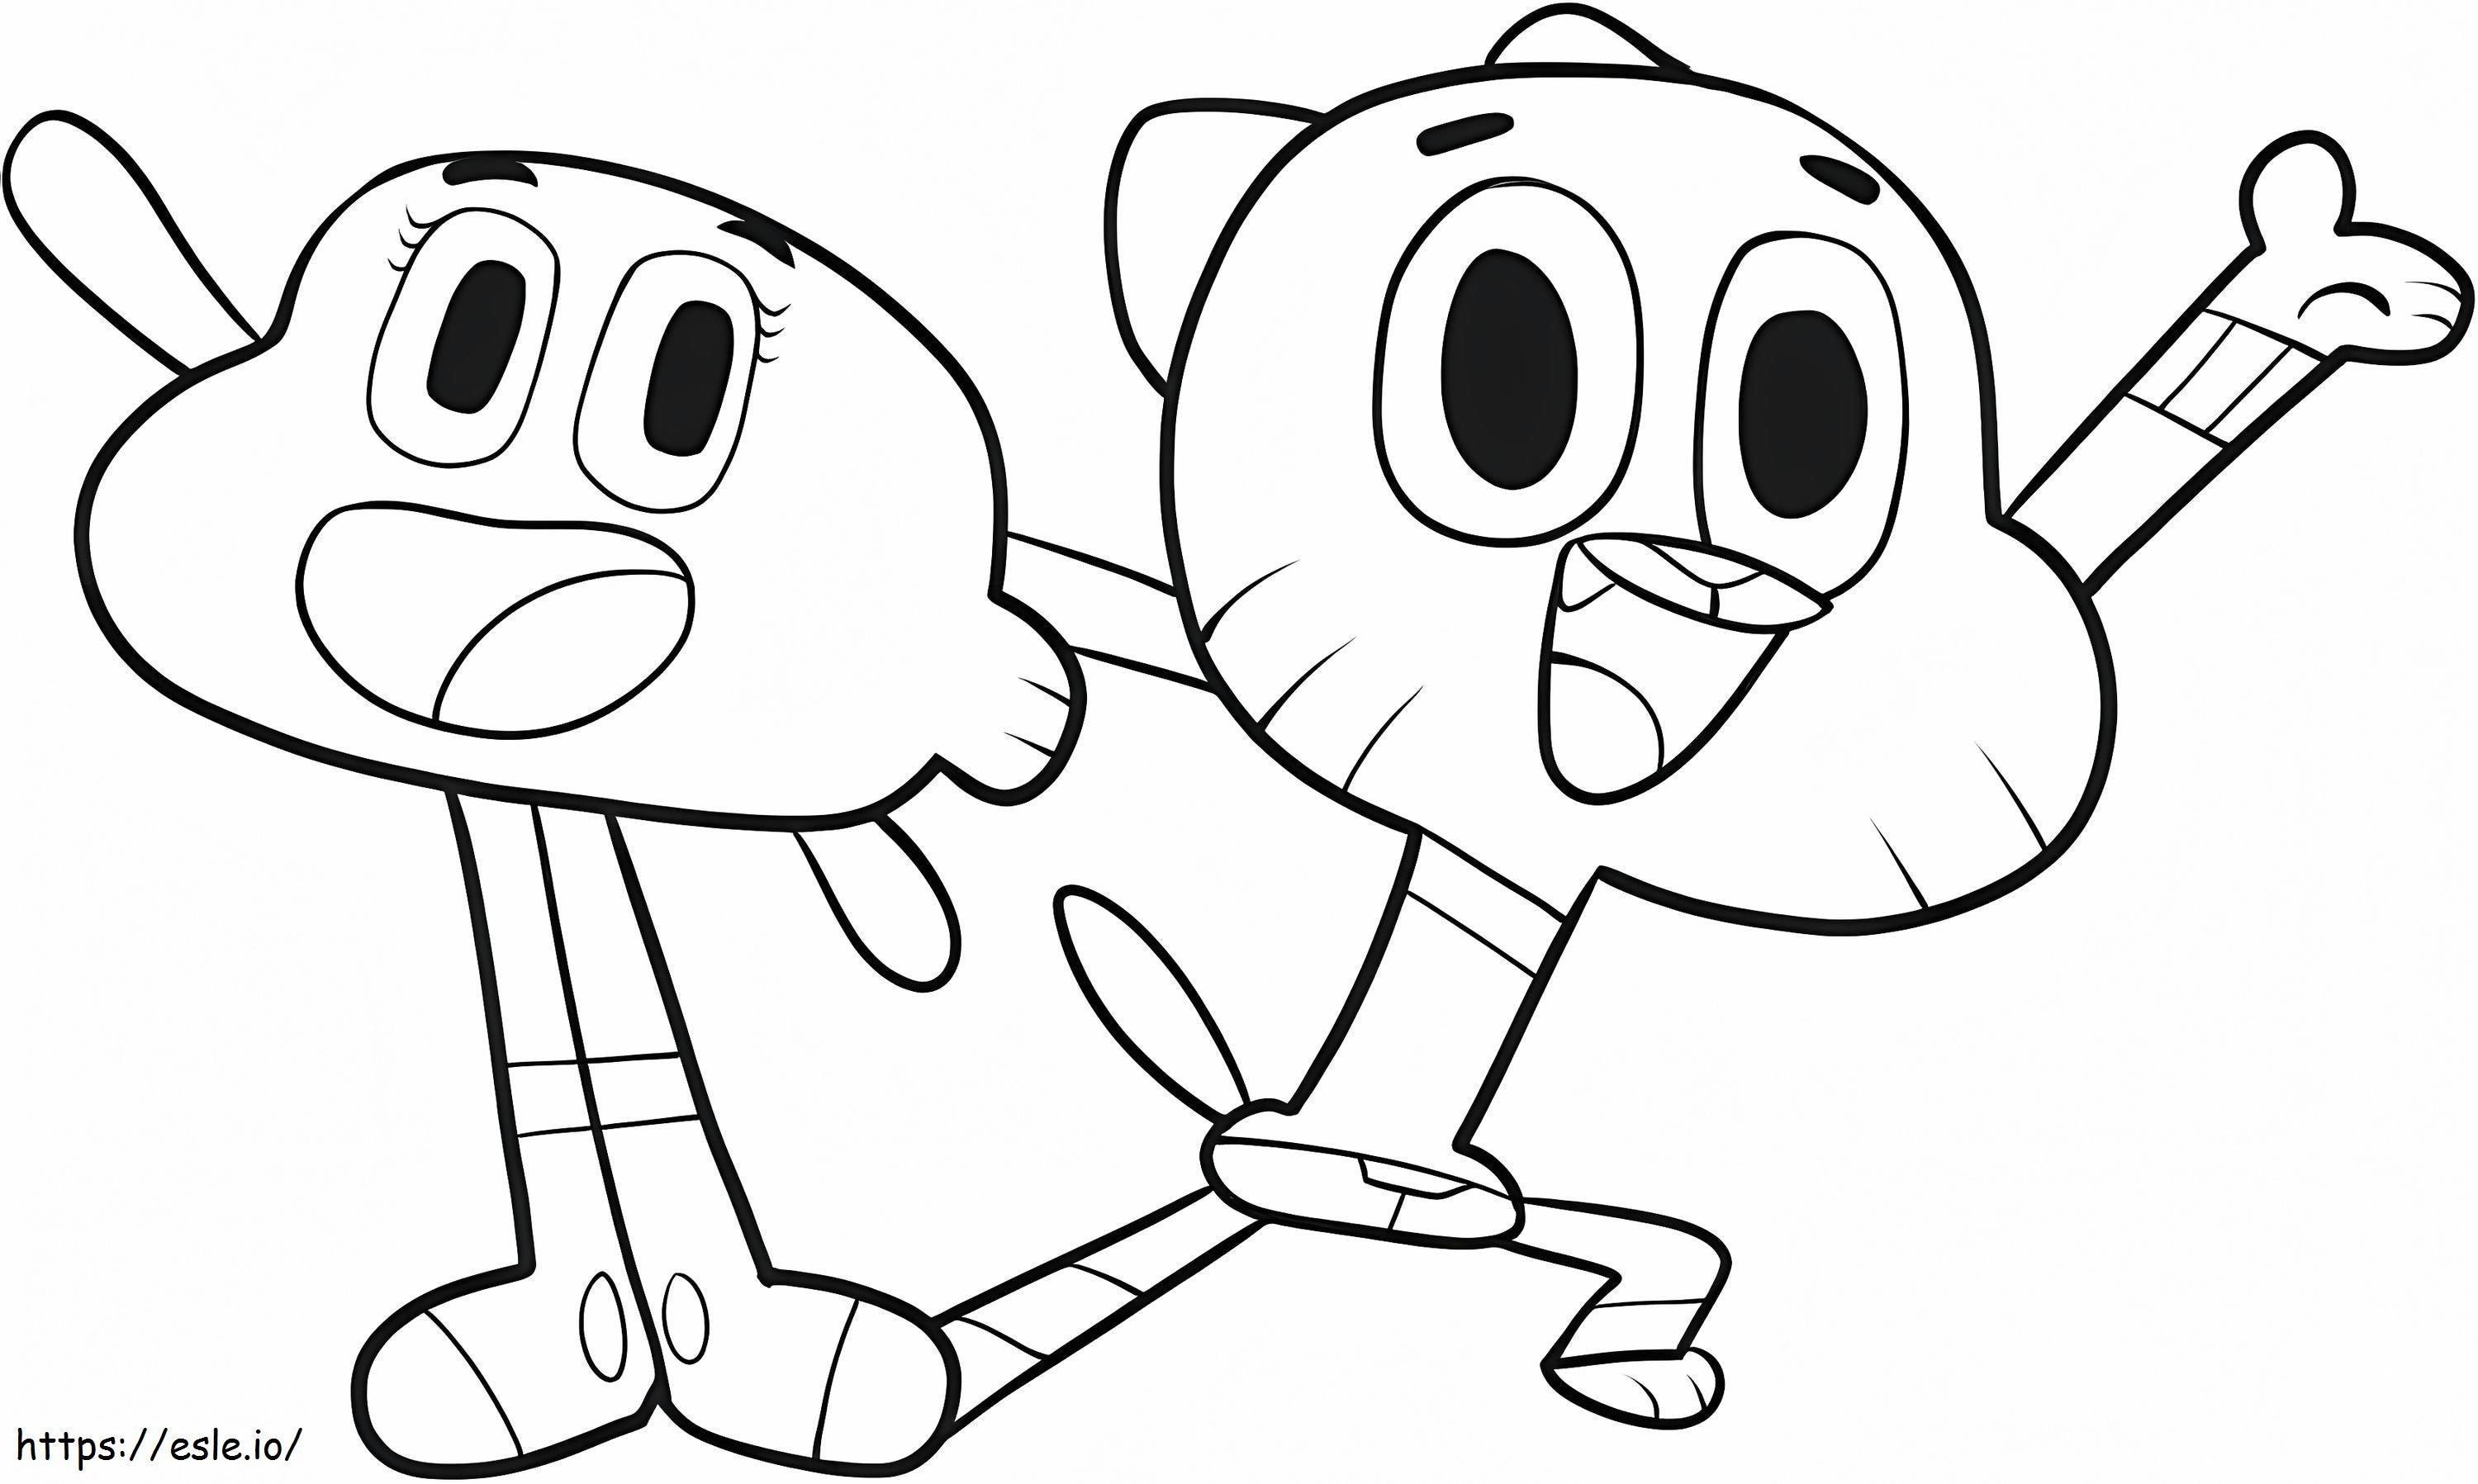 Darwin Y Gumball coloring page